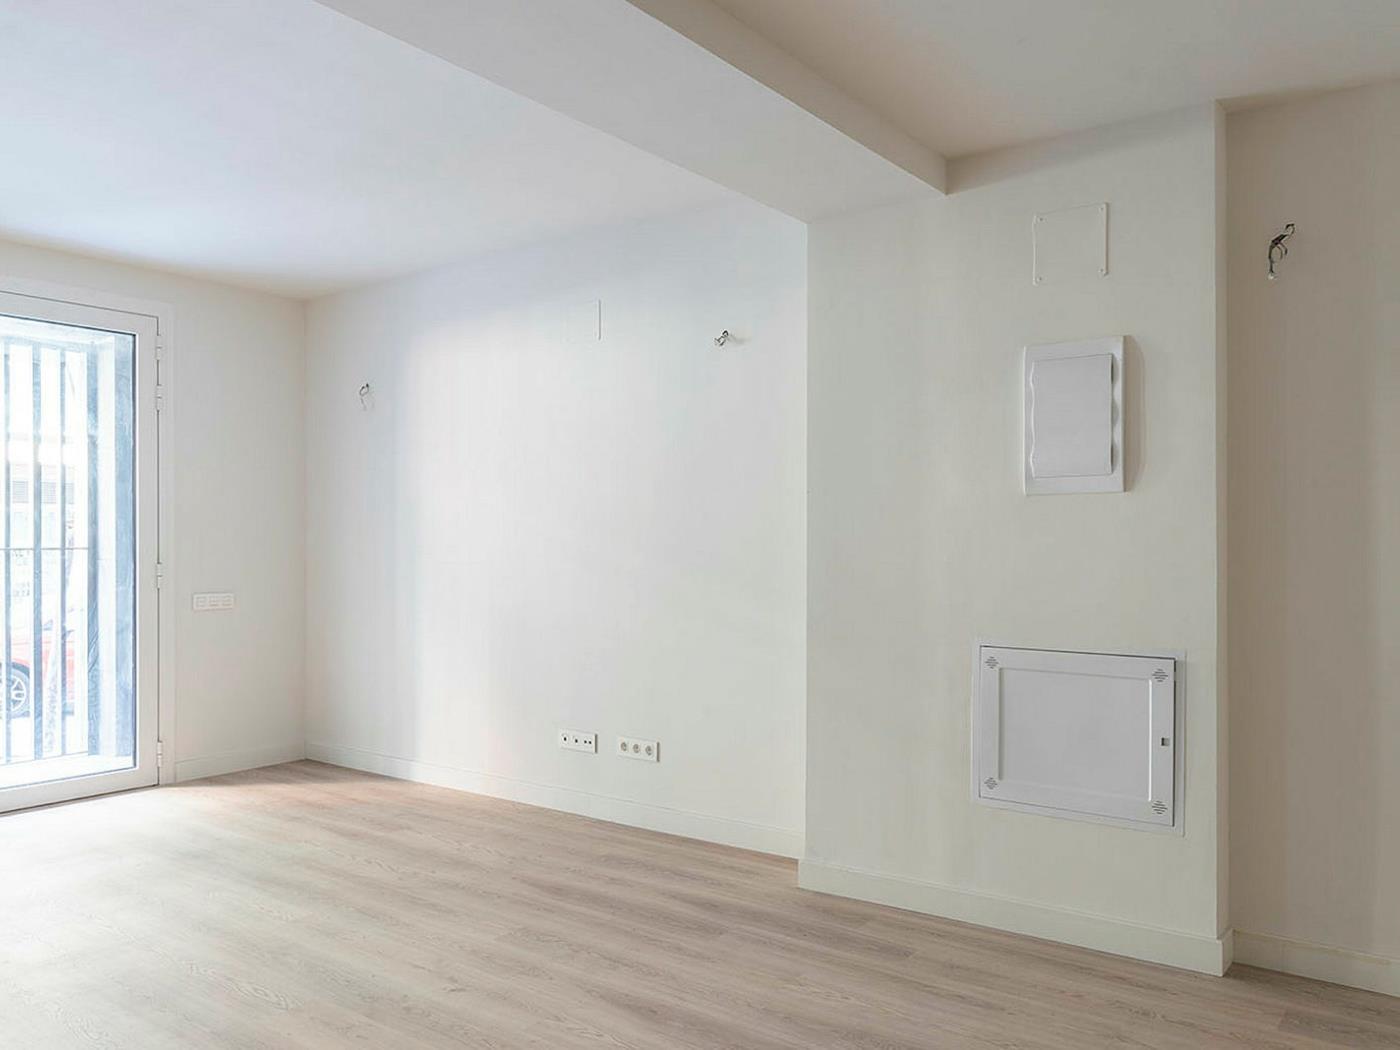 Newly refurbished one bedroom flat in Gracia - My Space Barcelona Apartments